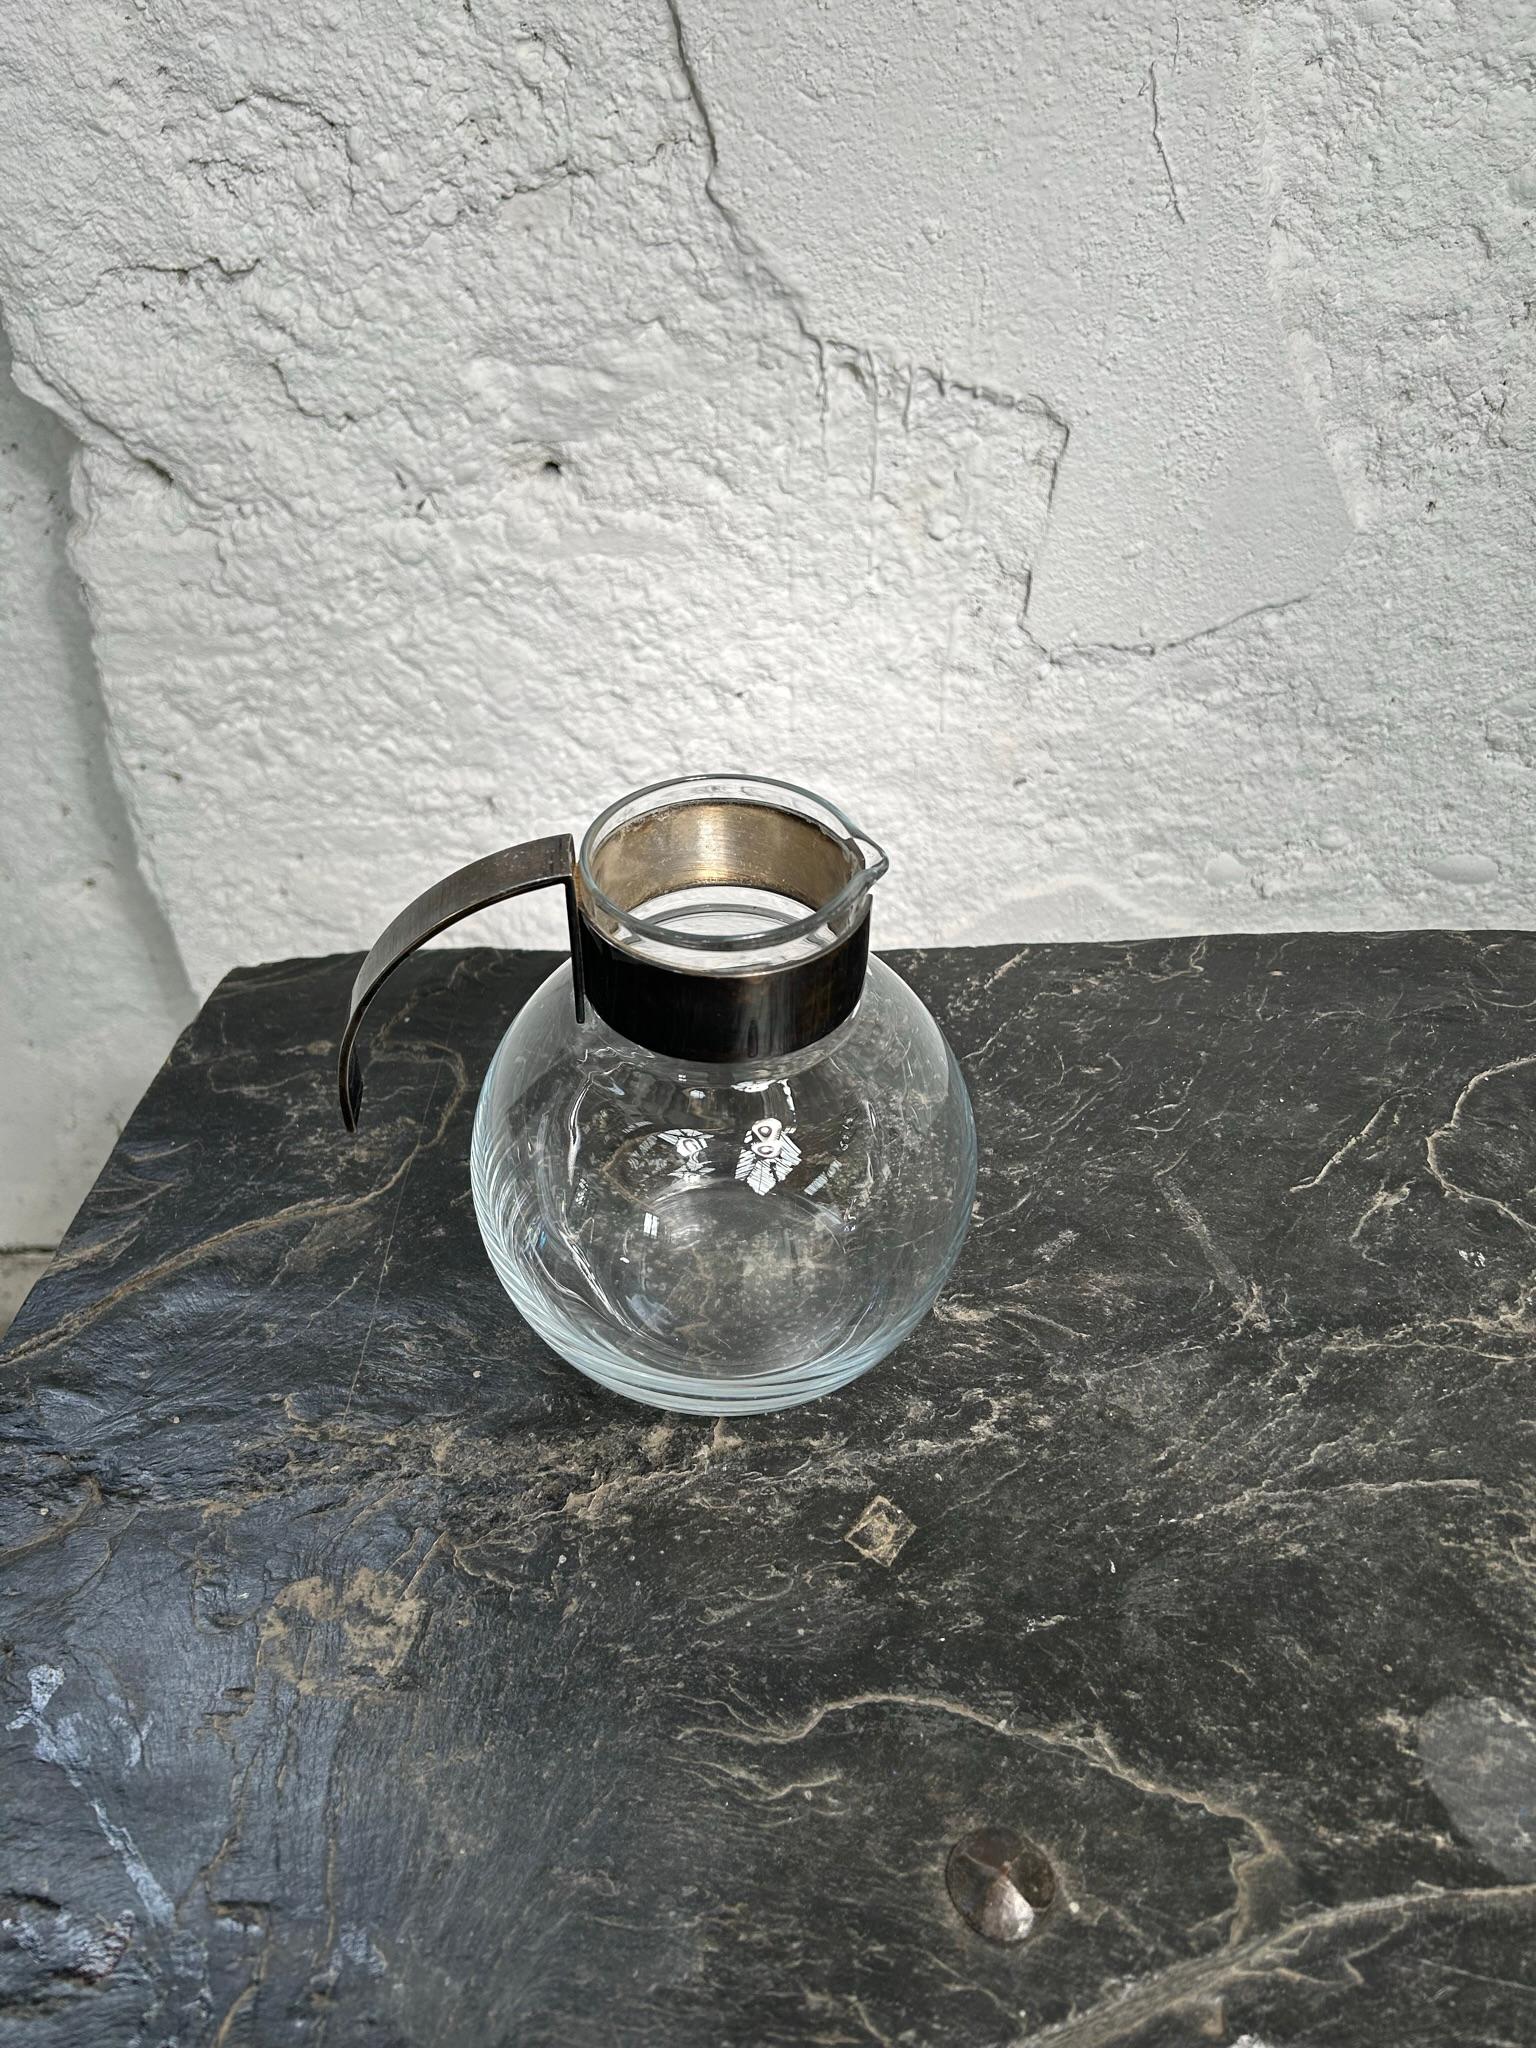 Lino Sabattini
Modernist glass carafe, circa 1970, sculptural silver metal handle.
In a perfect state
Height 19.5 cm
Width 20 cm